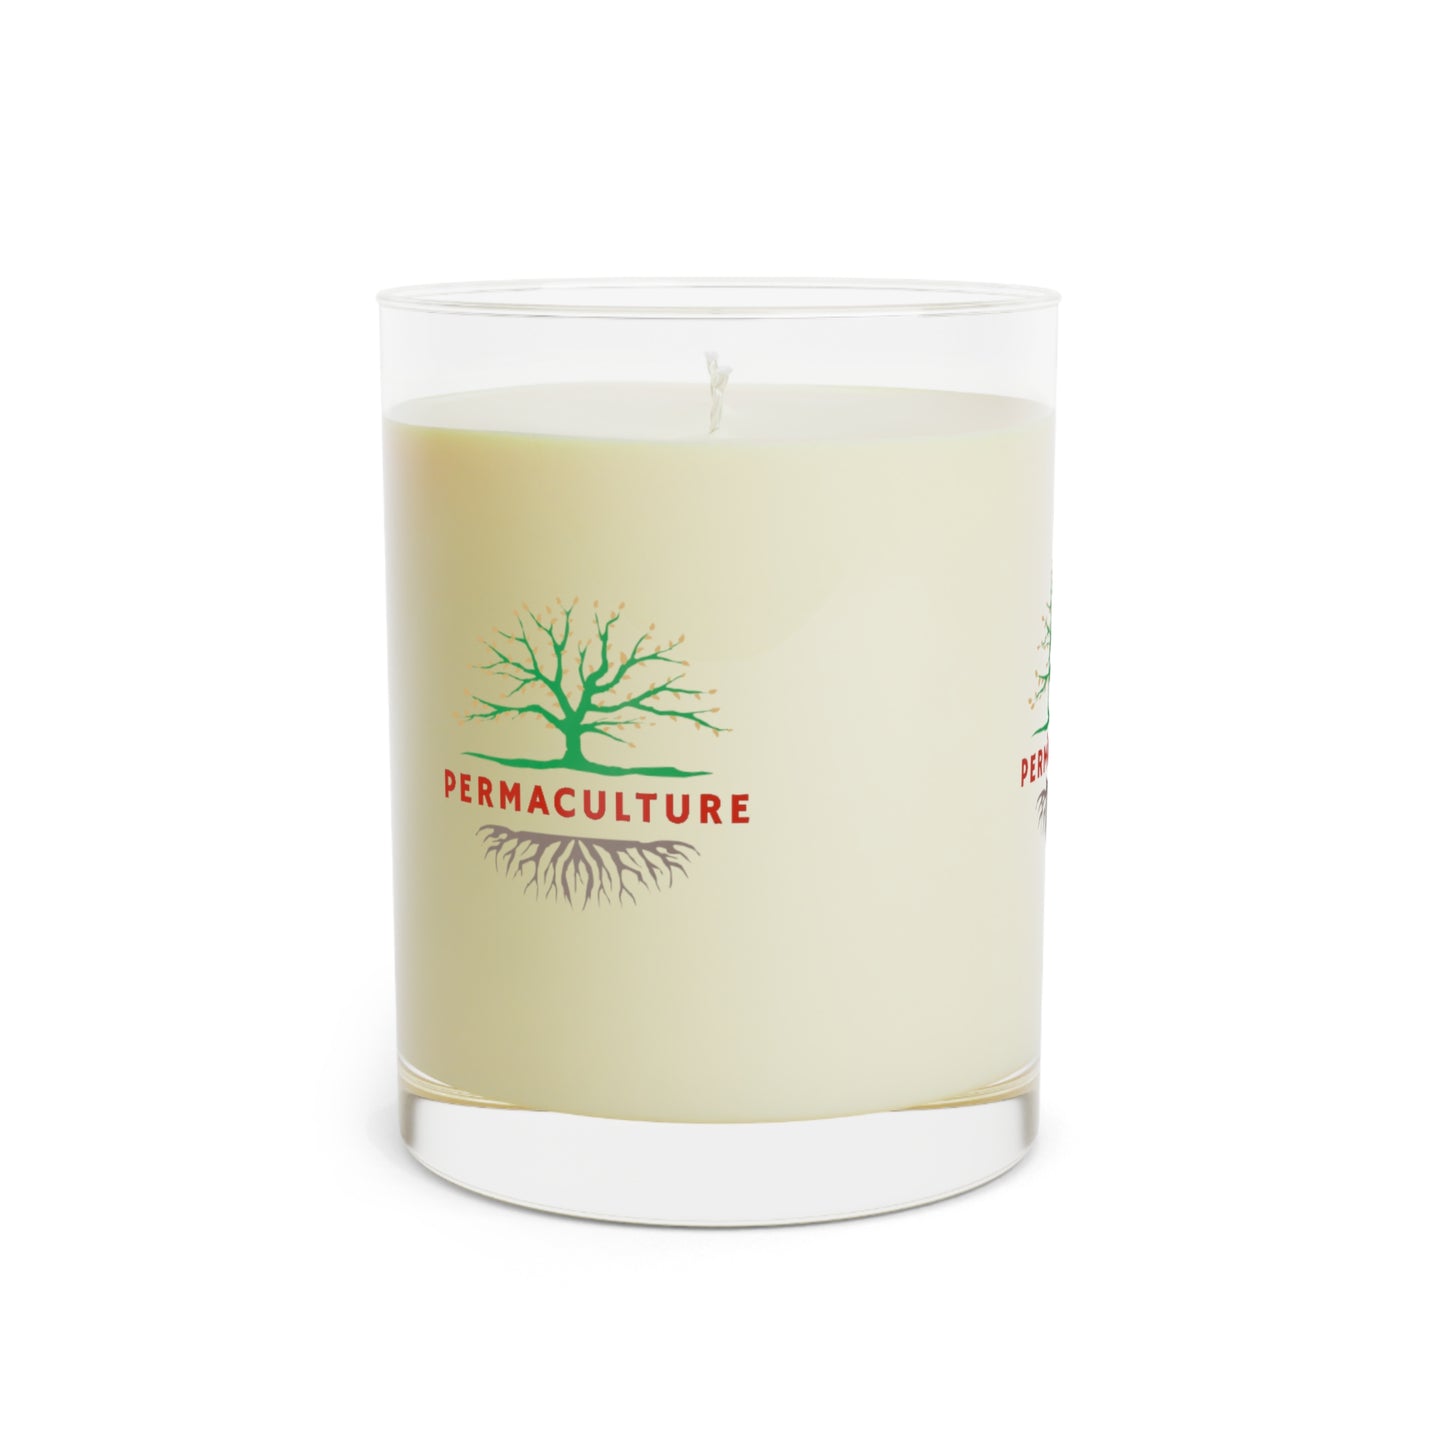 Permaculture, Scented Candle, Full Glass, 11oz